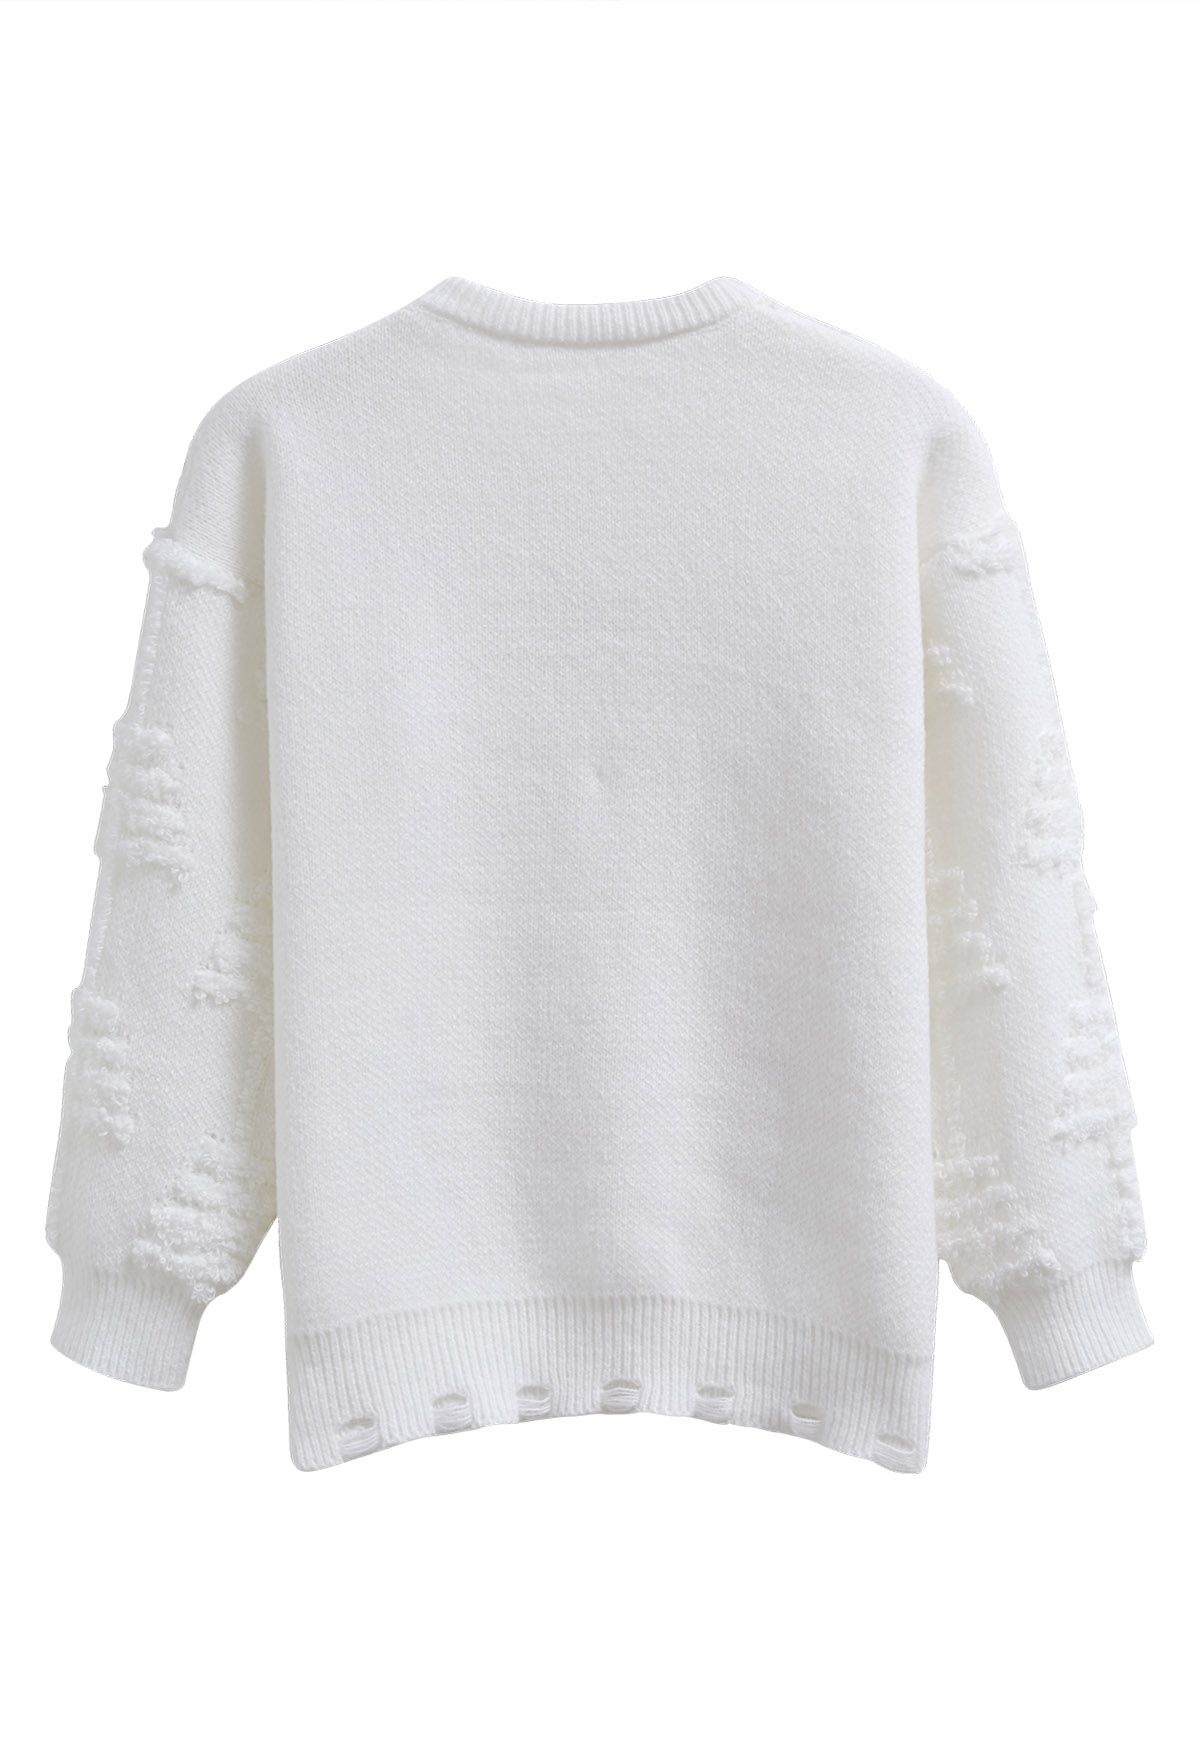 Pearl Christmas Tree Embossed Bowknot Knit Sweater in White